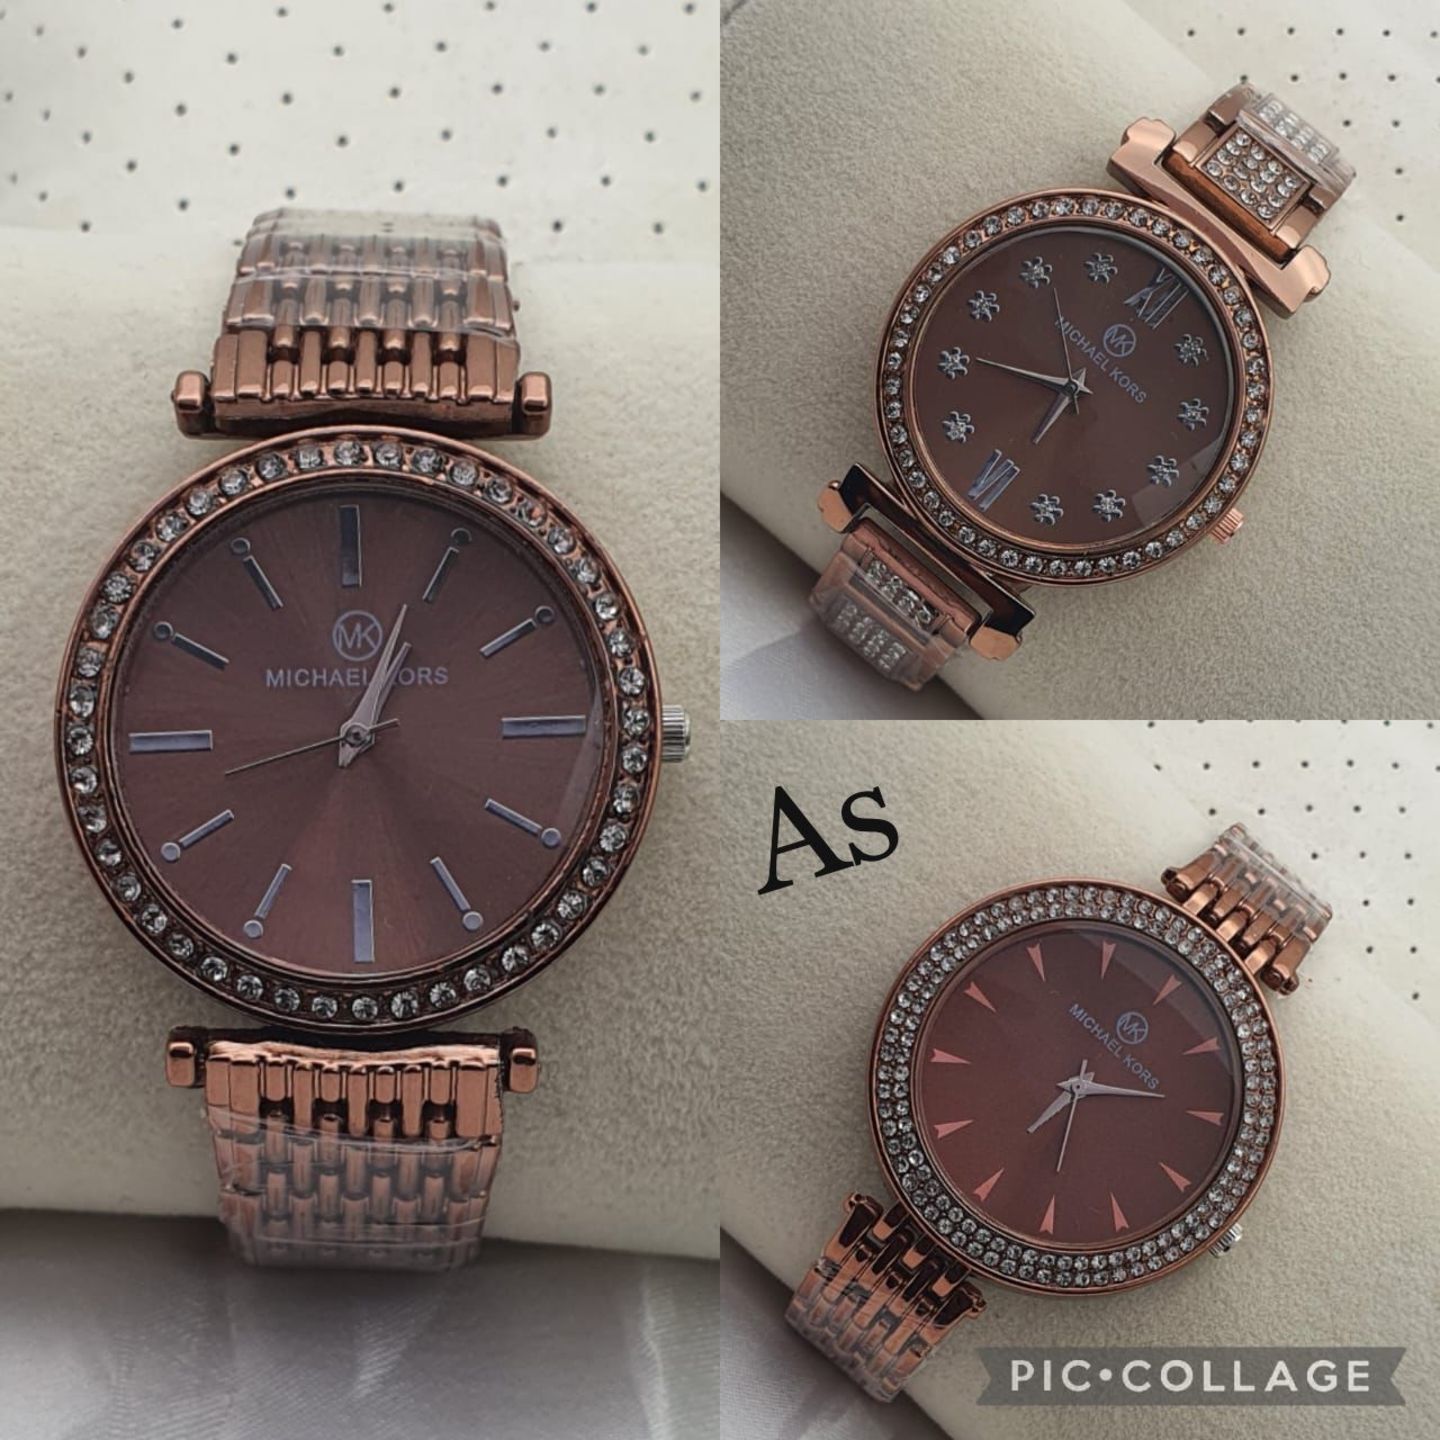 Ladies Guess,Rolex, Micheal Kors Combo Watch Gift  Engagement, anniversary, valentines day, mothers day for sister, wife,friend,mother, baby shower